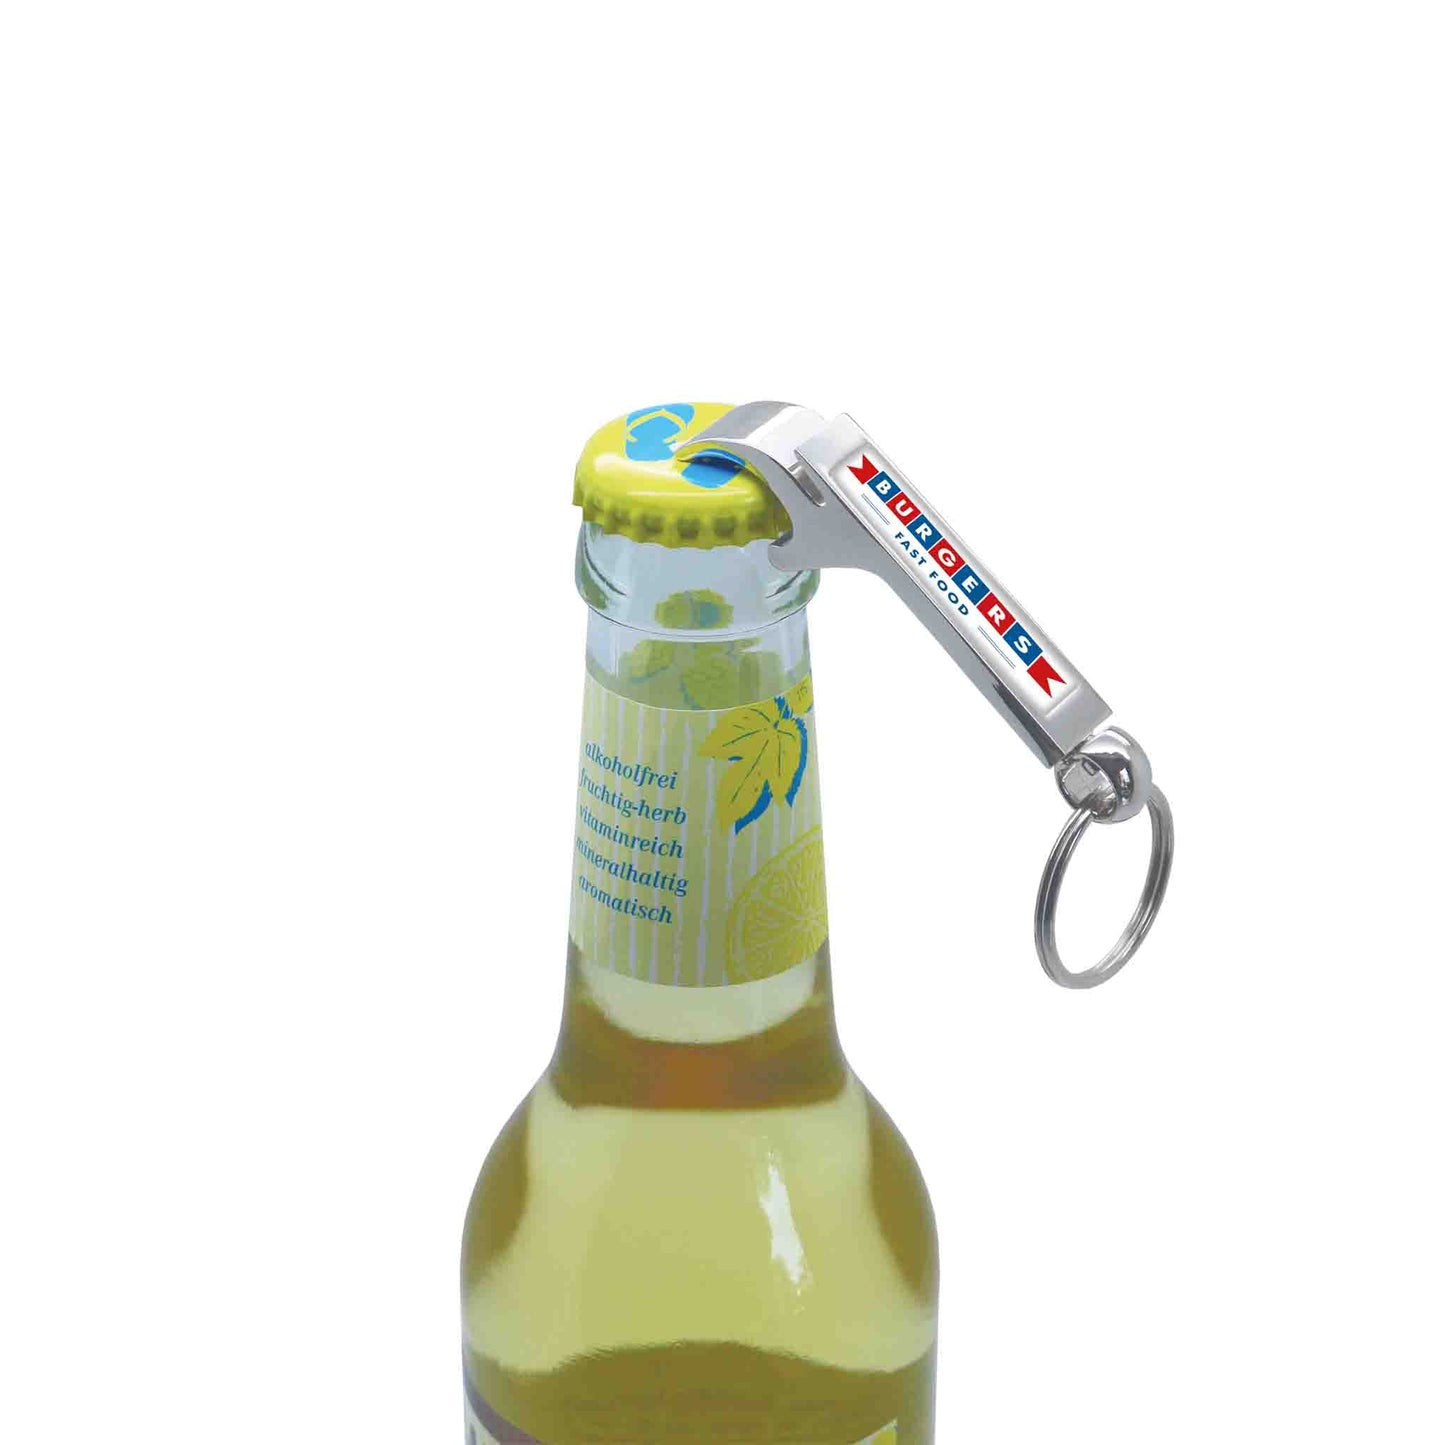 MagBottle "metal" keychain